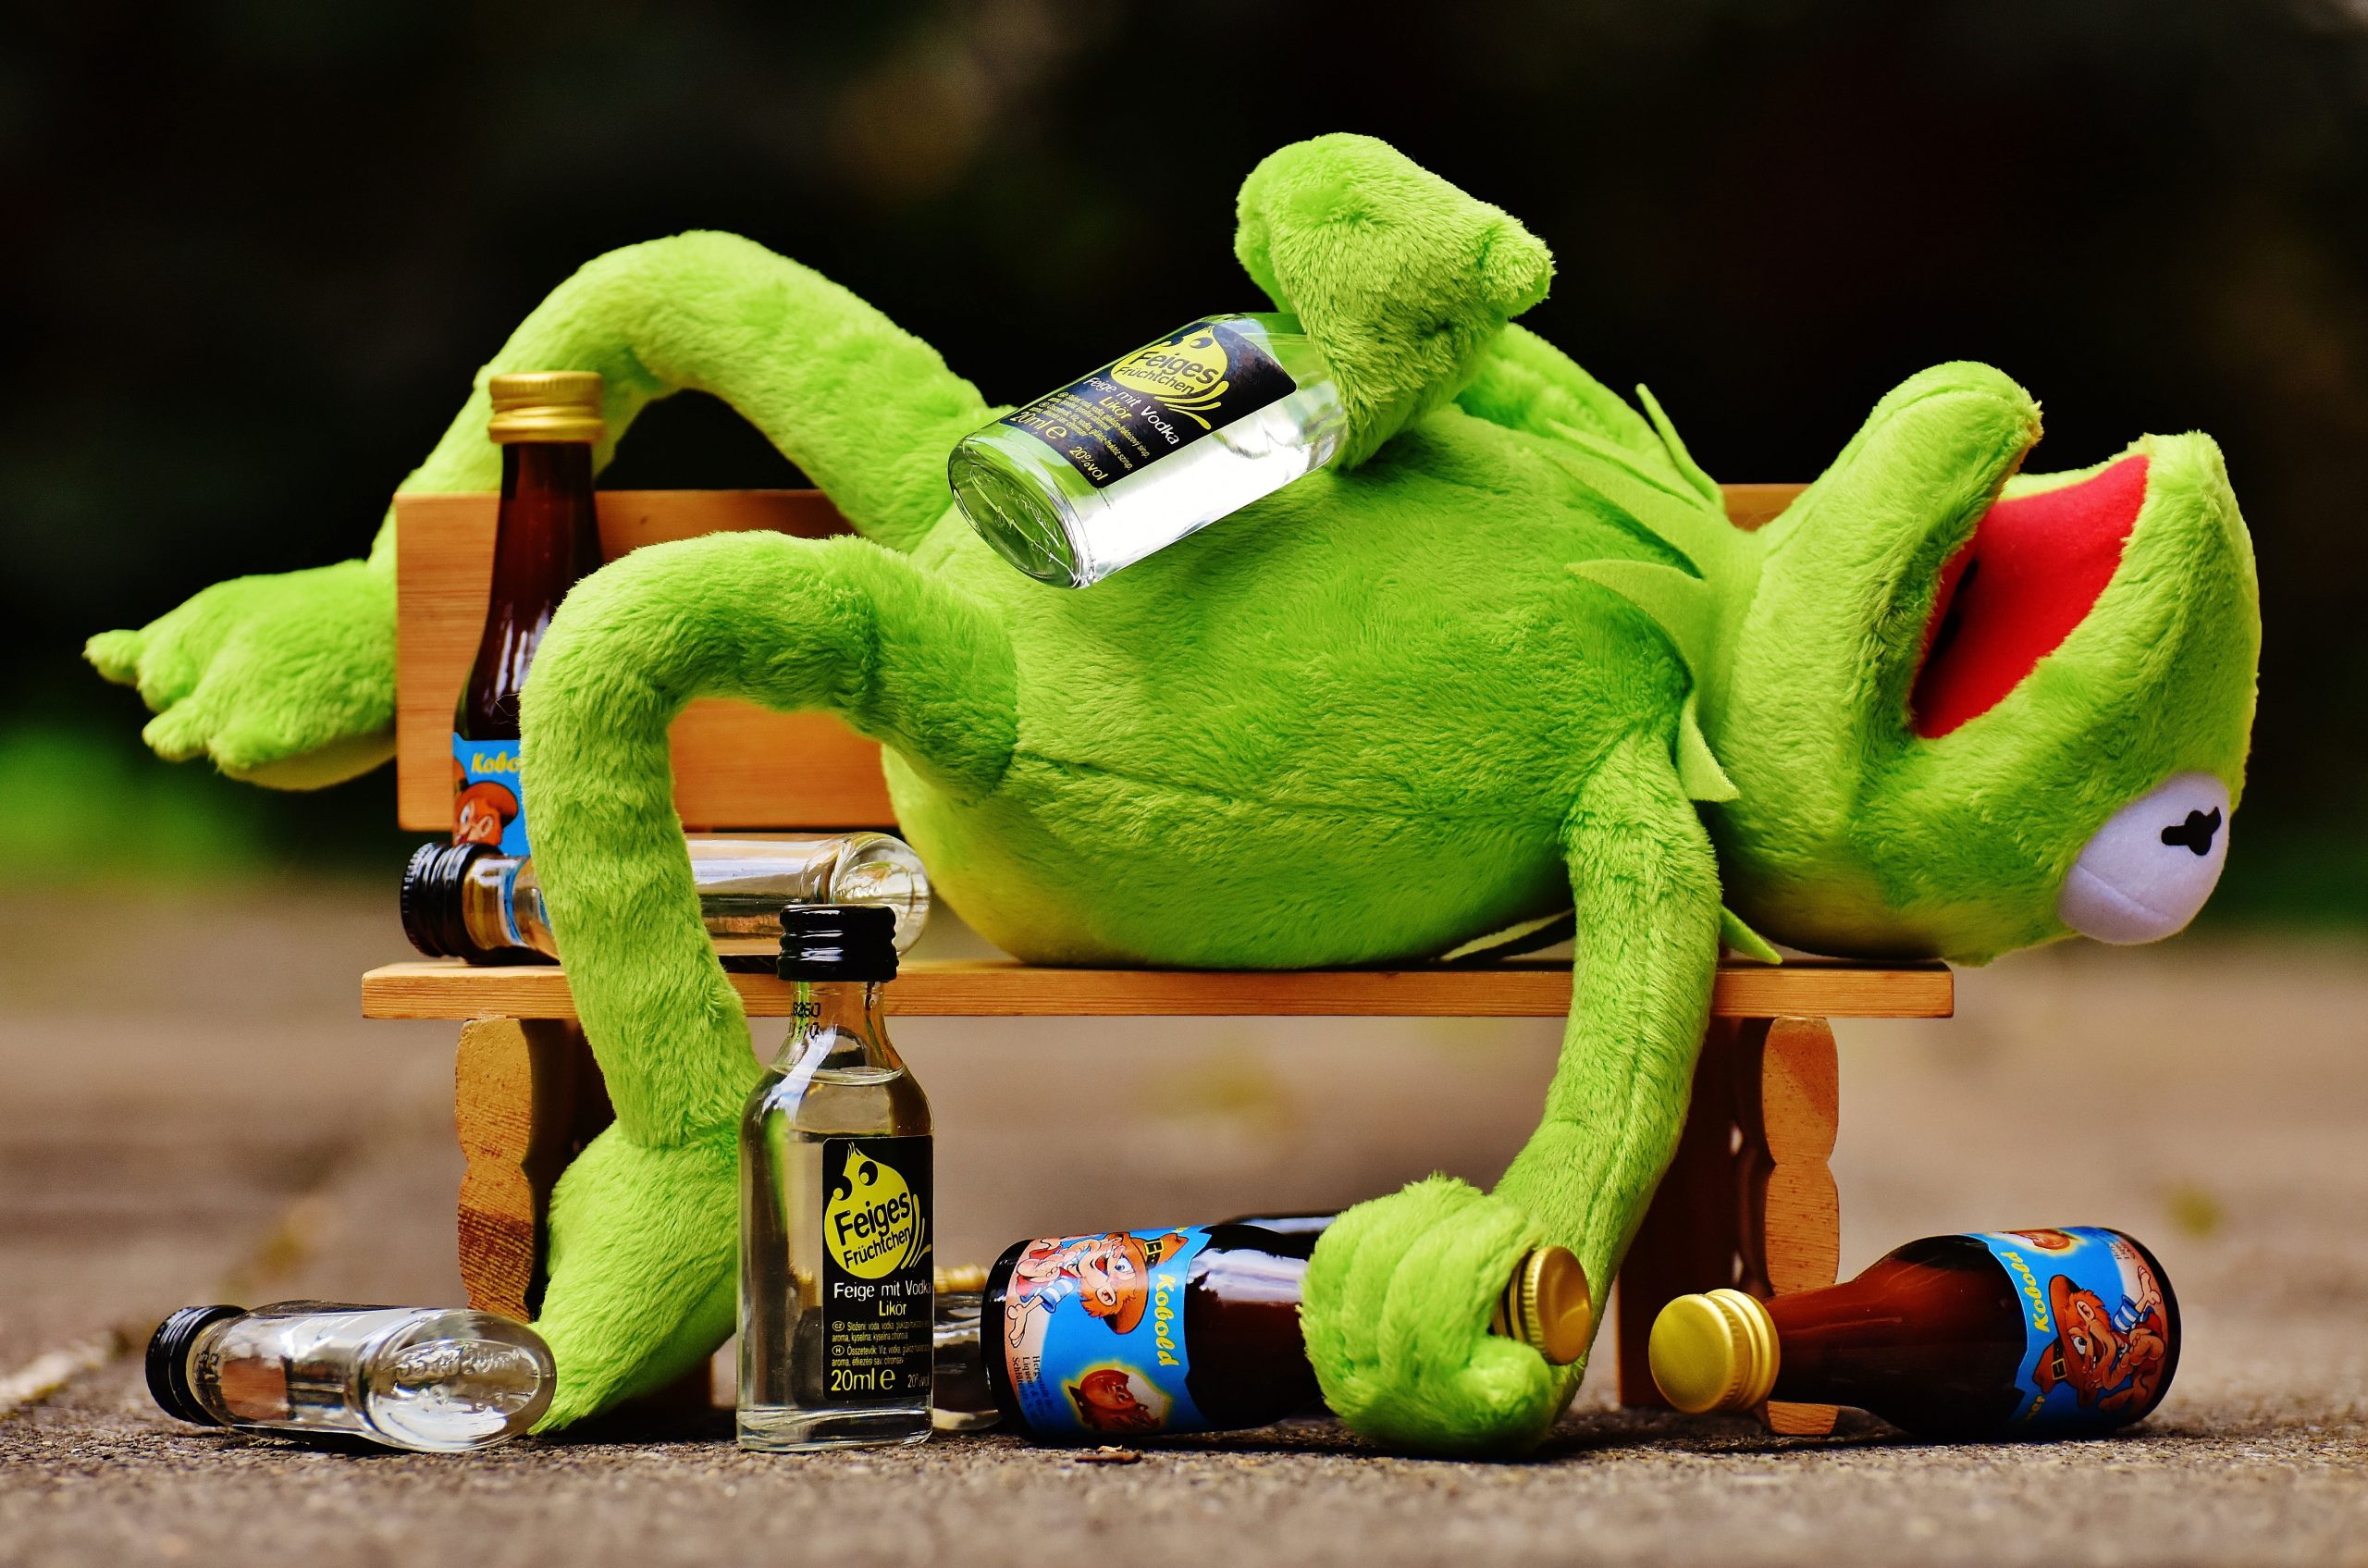 Kermit the Frog with glass bottles lying on wooden bench wallpaper, drink